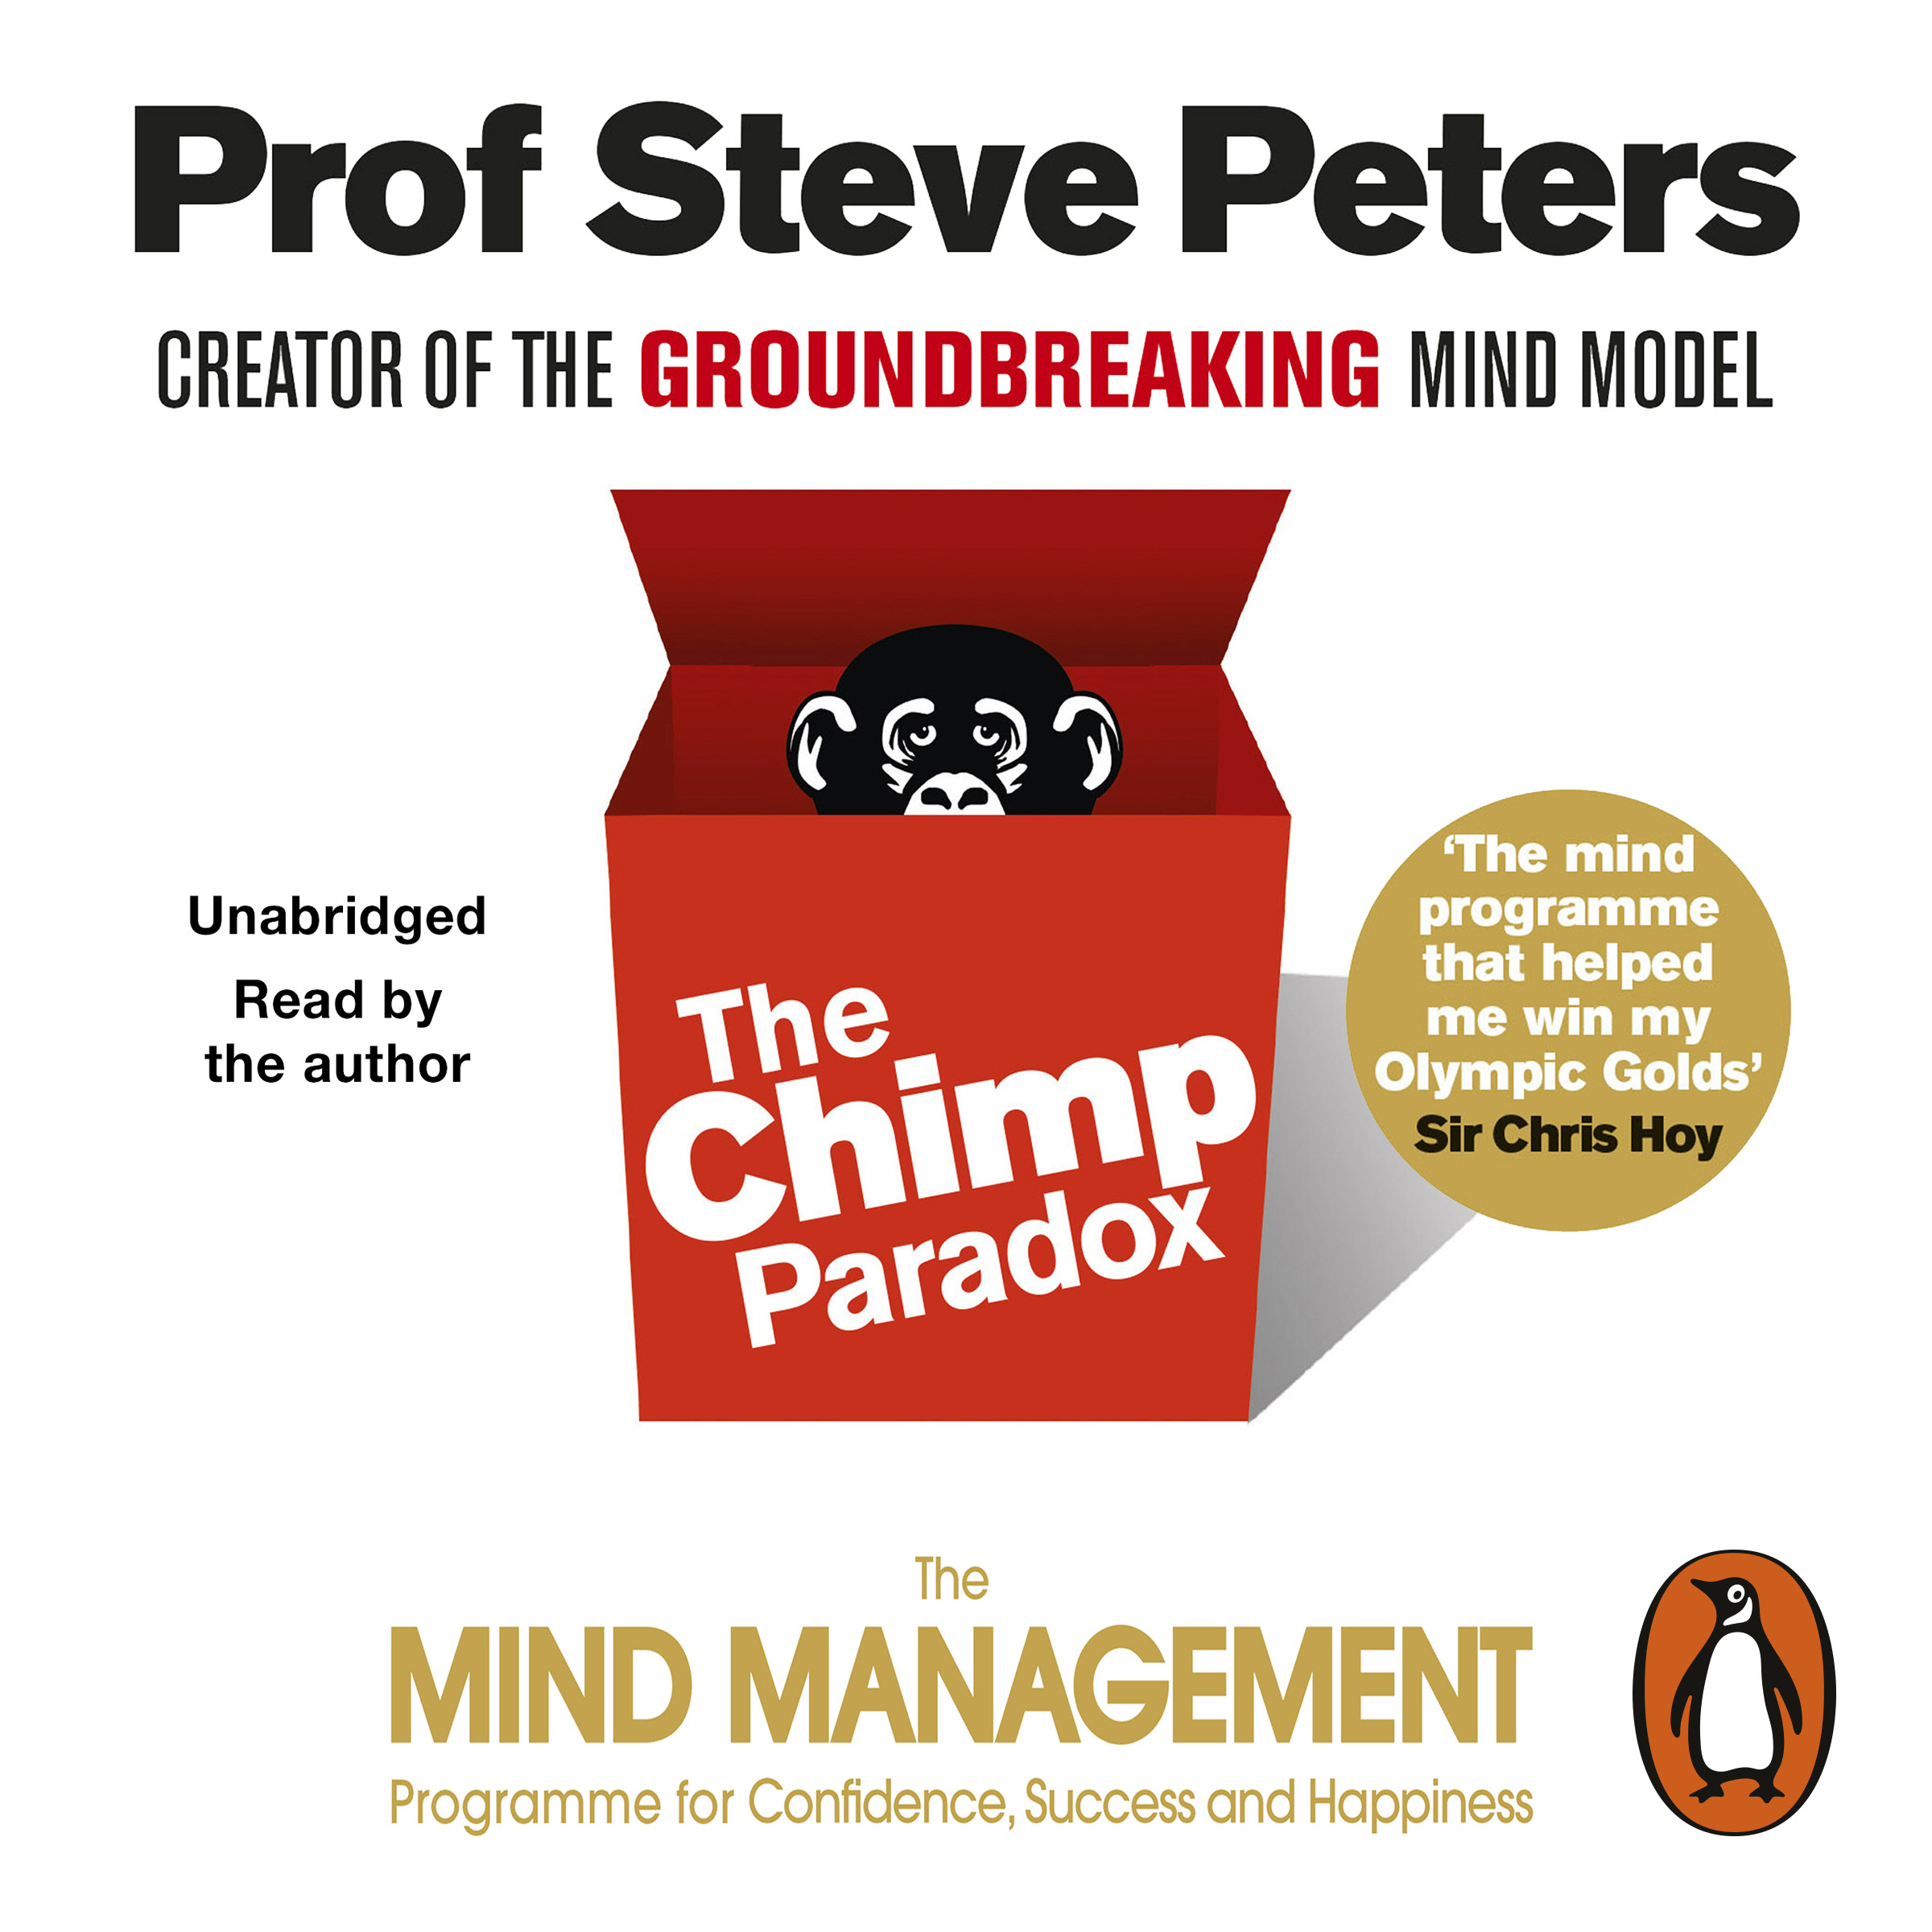 Audiobook image for The Chimp Paradox: white background with author name in black at the top. A red box with a chimp in it is in the centre, with the title in white across the box.